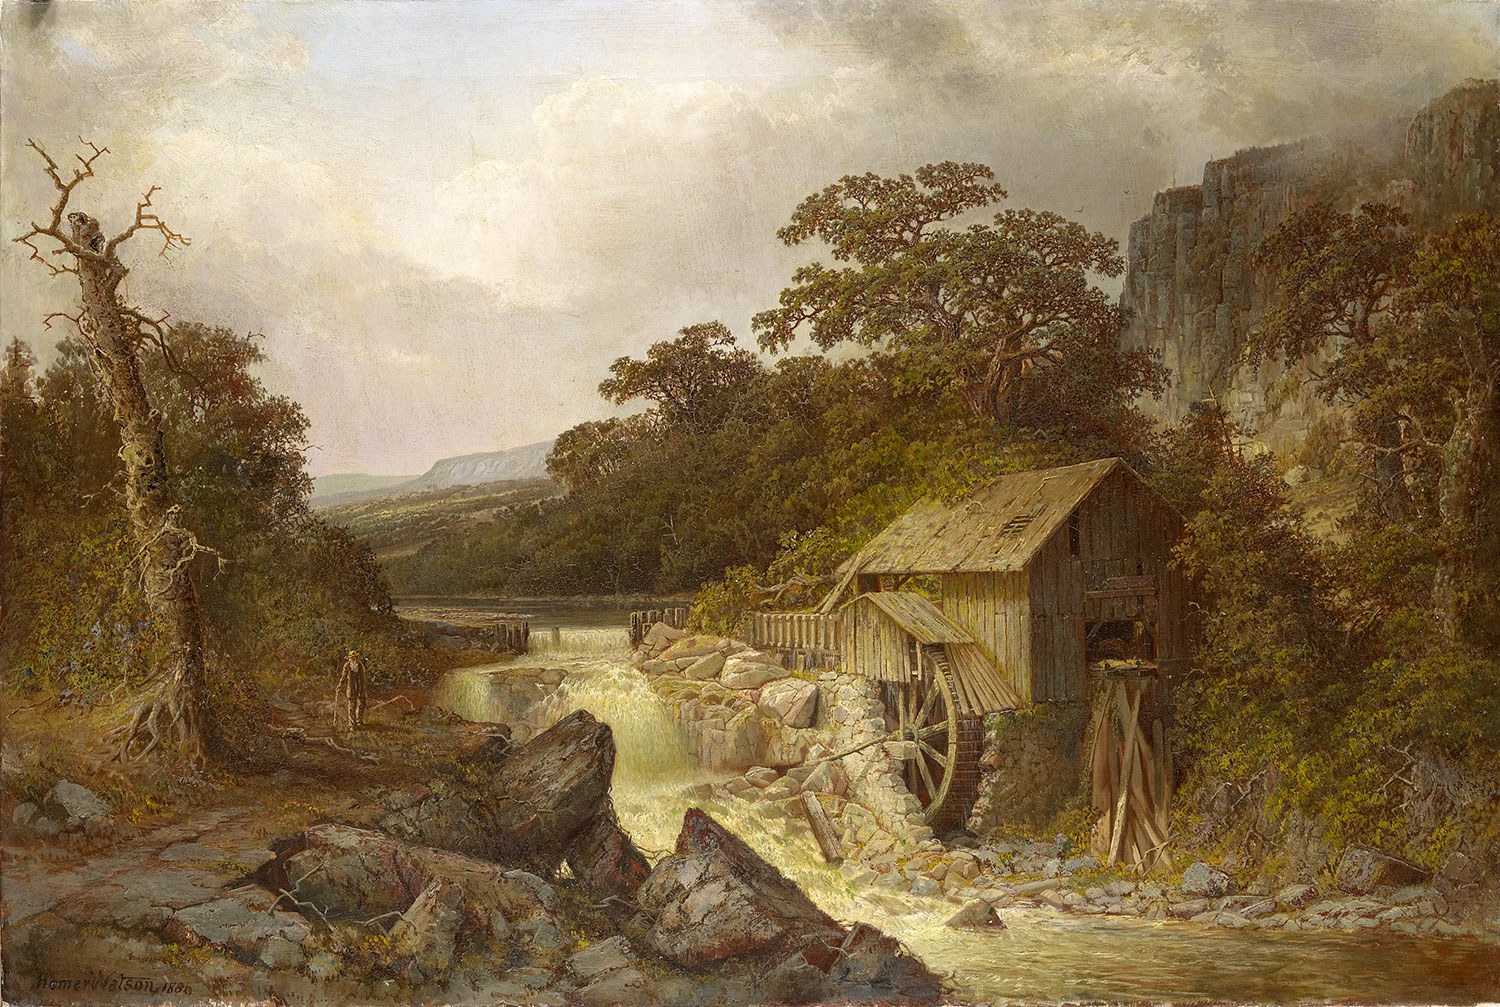 The Pioneer Mill, 1880, by Homer Watson, oil on canvas, 86 x 127 cm, Royal Collection (Photo: Royal Collection Trust/© HM Queen Elizabeth II 2012)